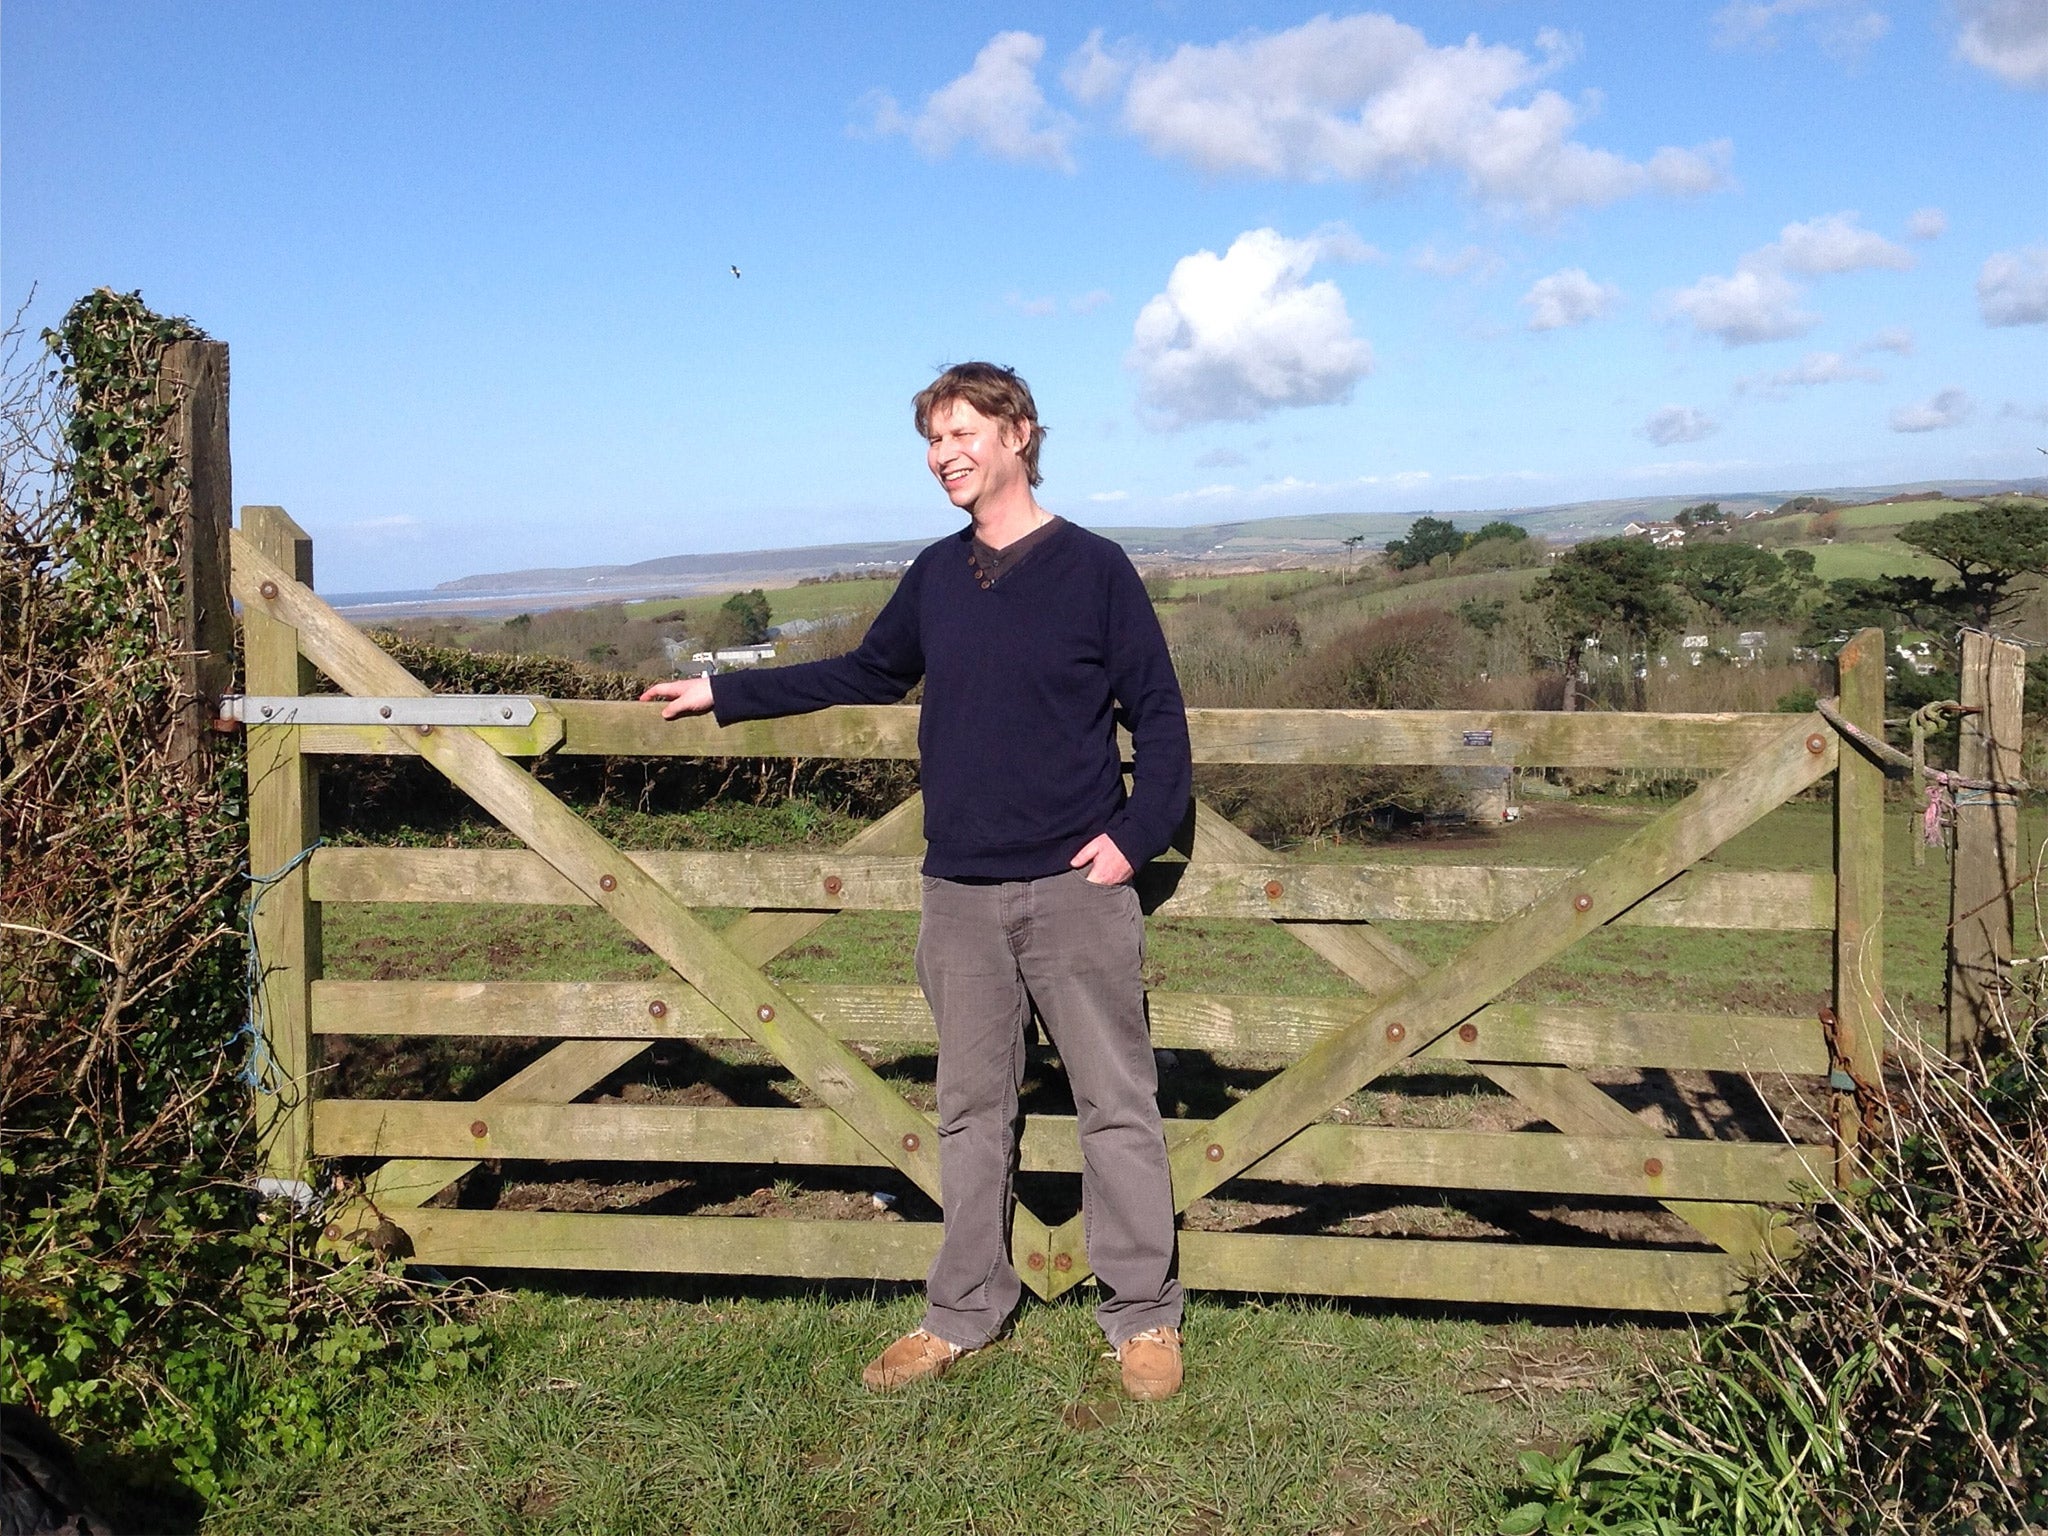 Nick Arnold in Appledore, Devon, where he says a clash took place after the Battle of Hastings